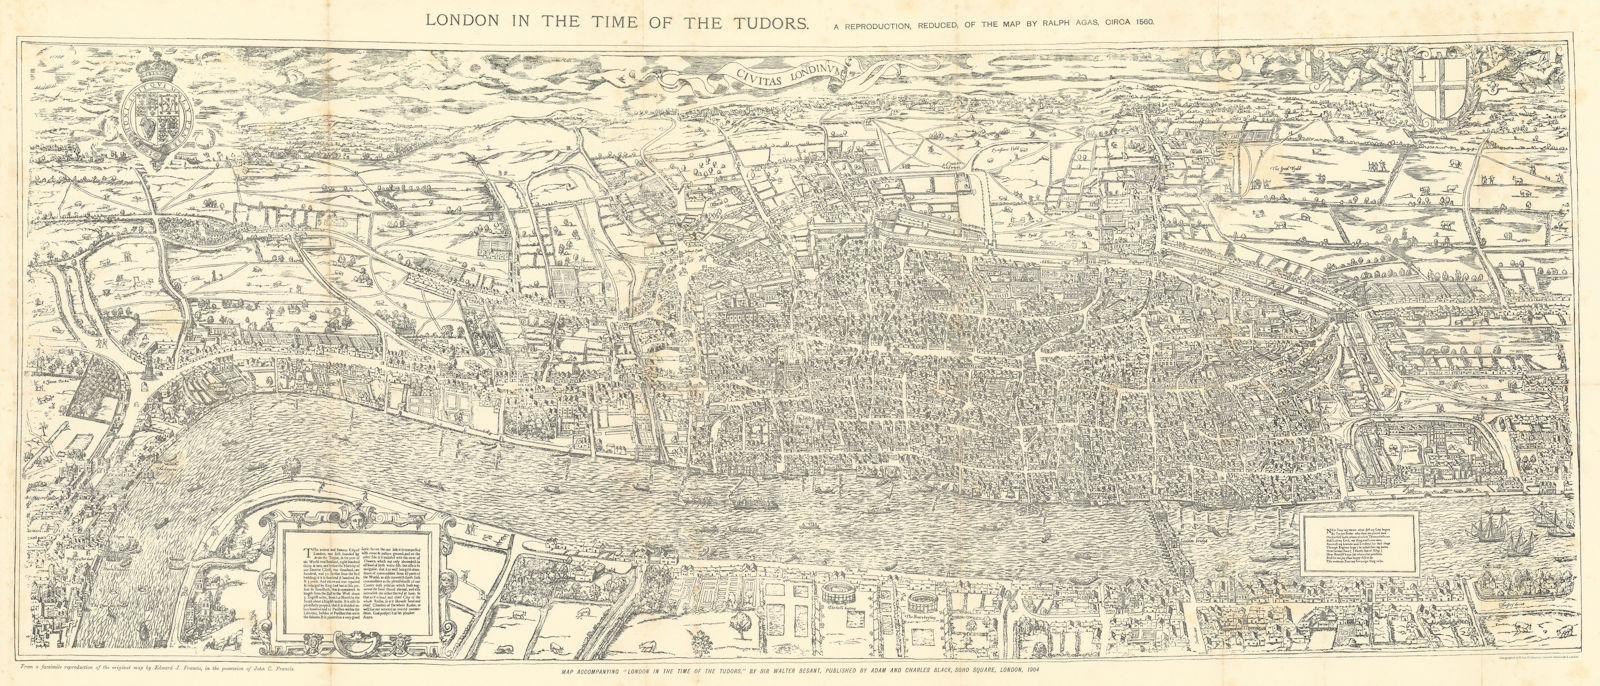 Associate Product London in the time of the Tudors, circa 1560, after Ralph Agas. 41x96cm 1908 map